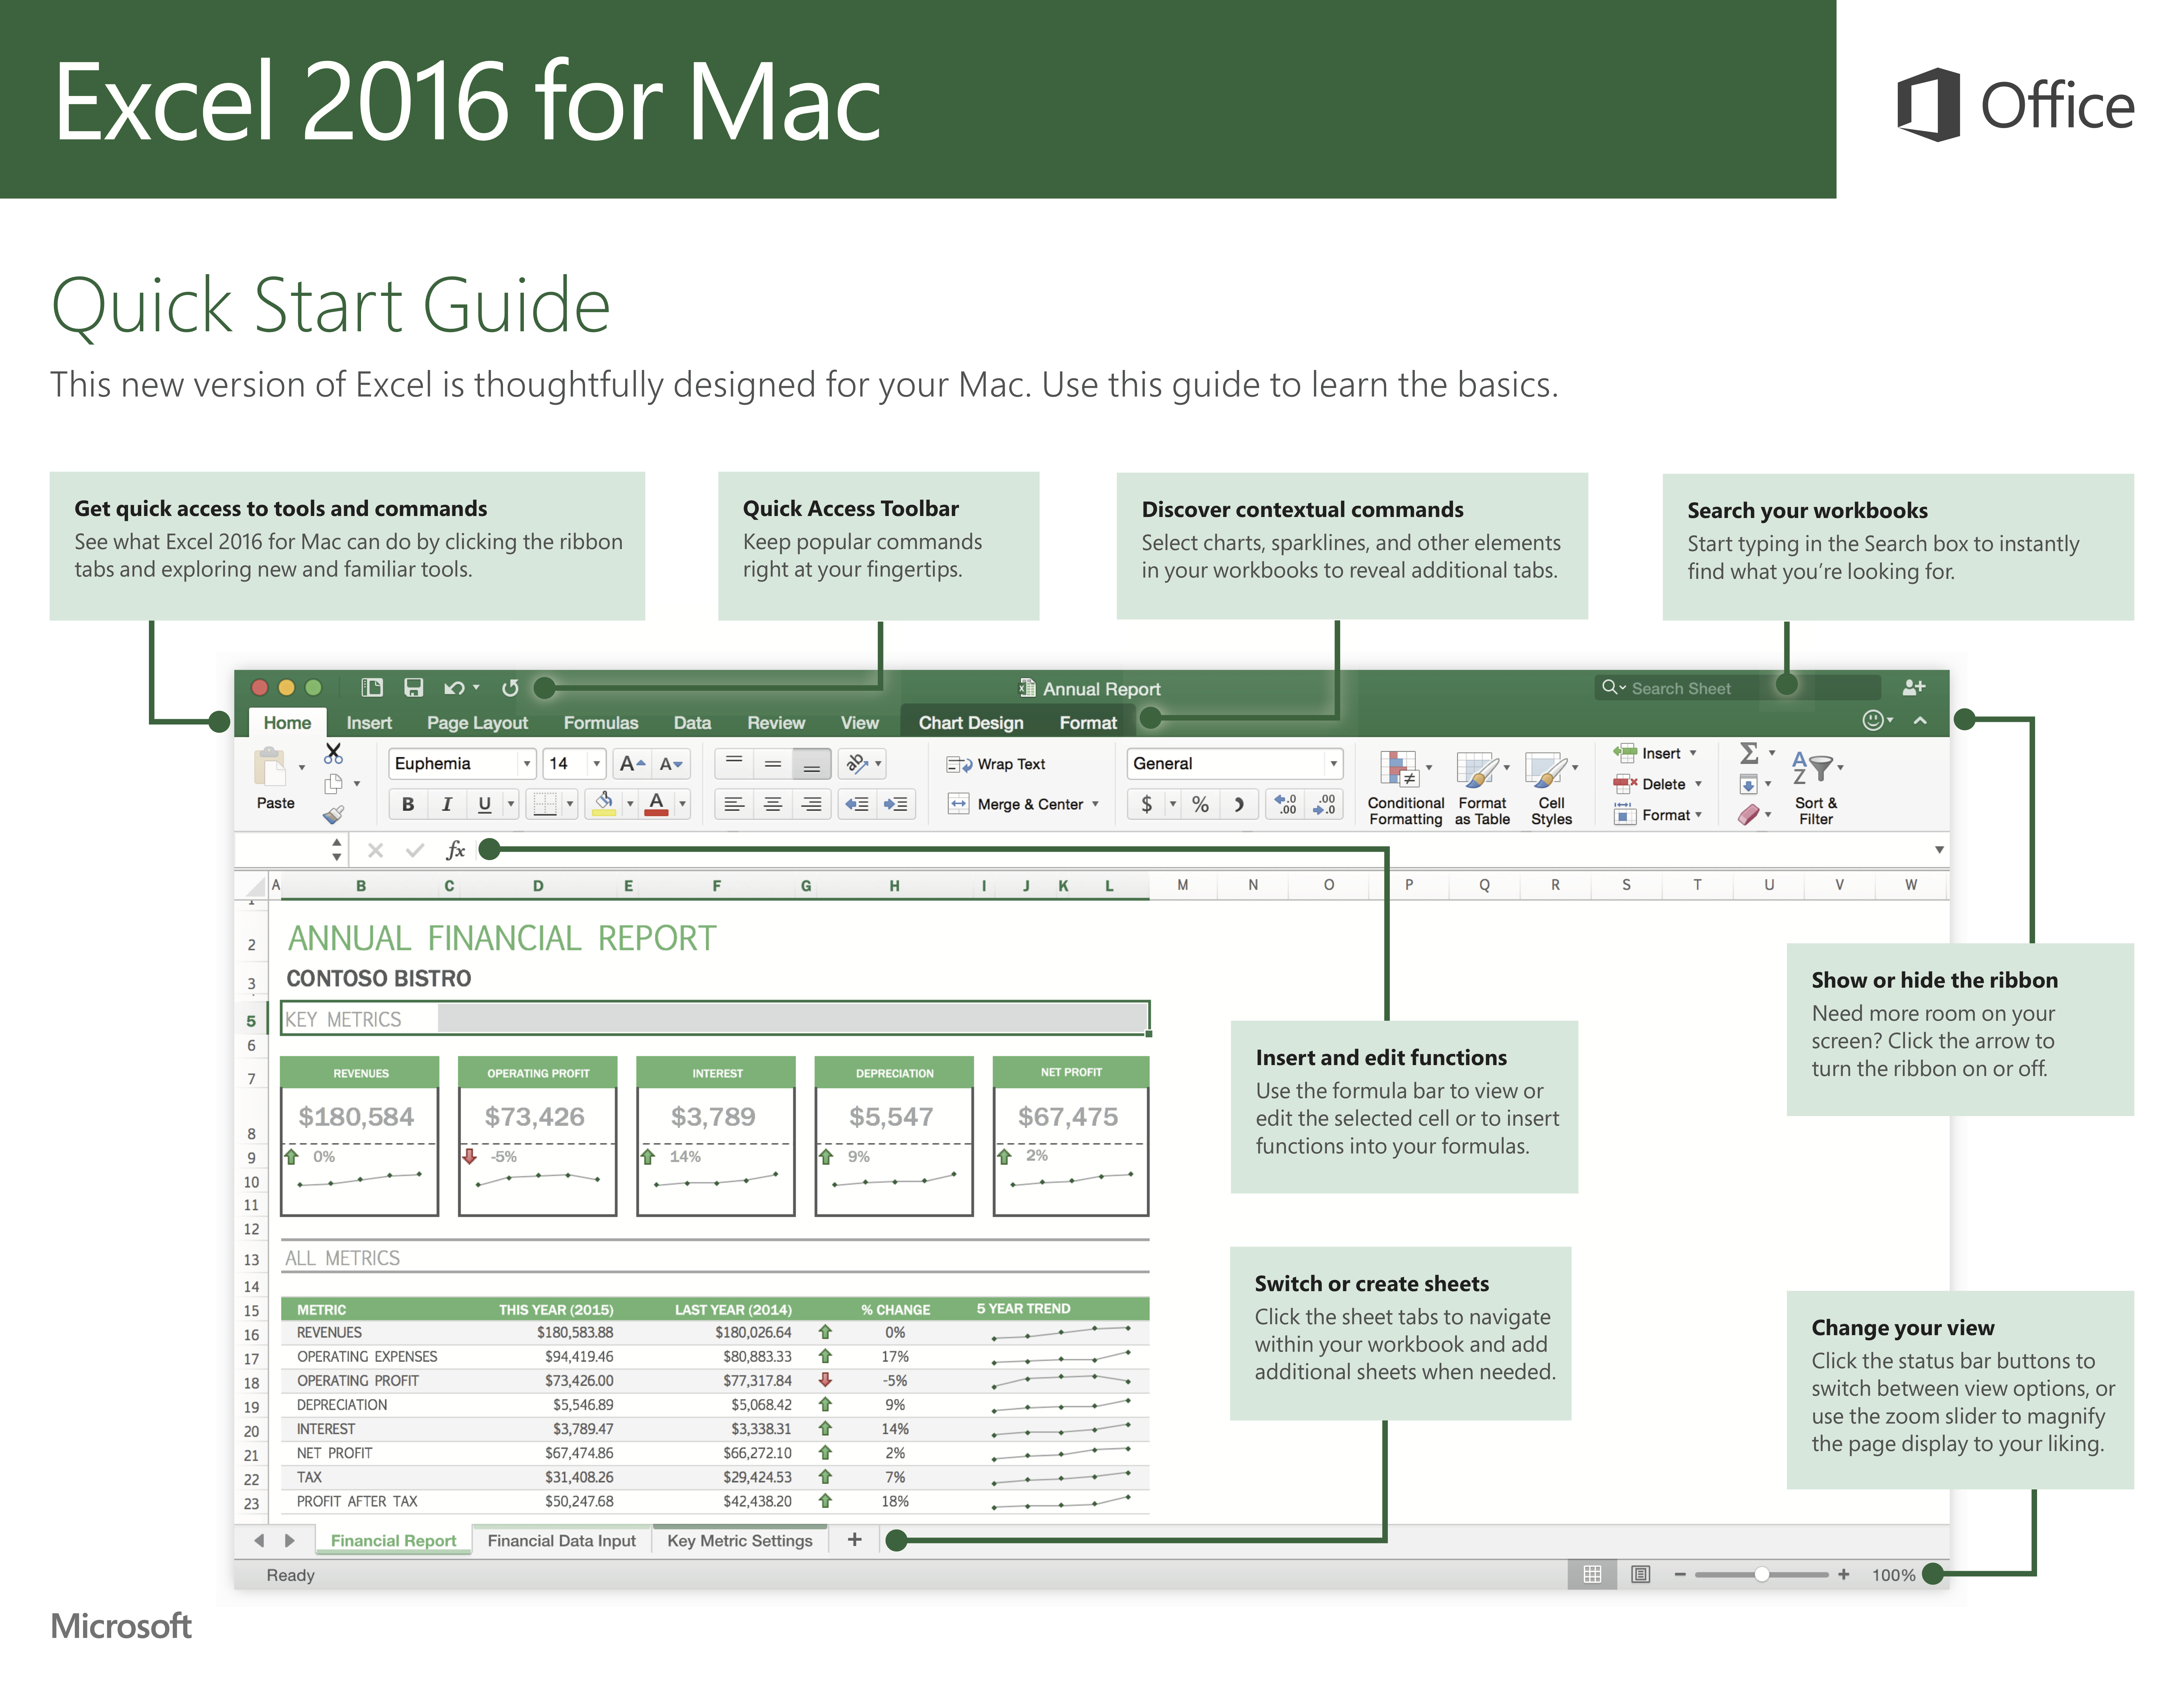 EXCEL_2016_FOR_MAC_QUICK_START_GUIDE.png